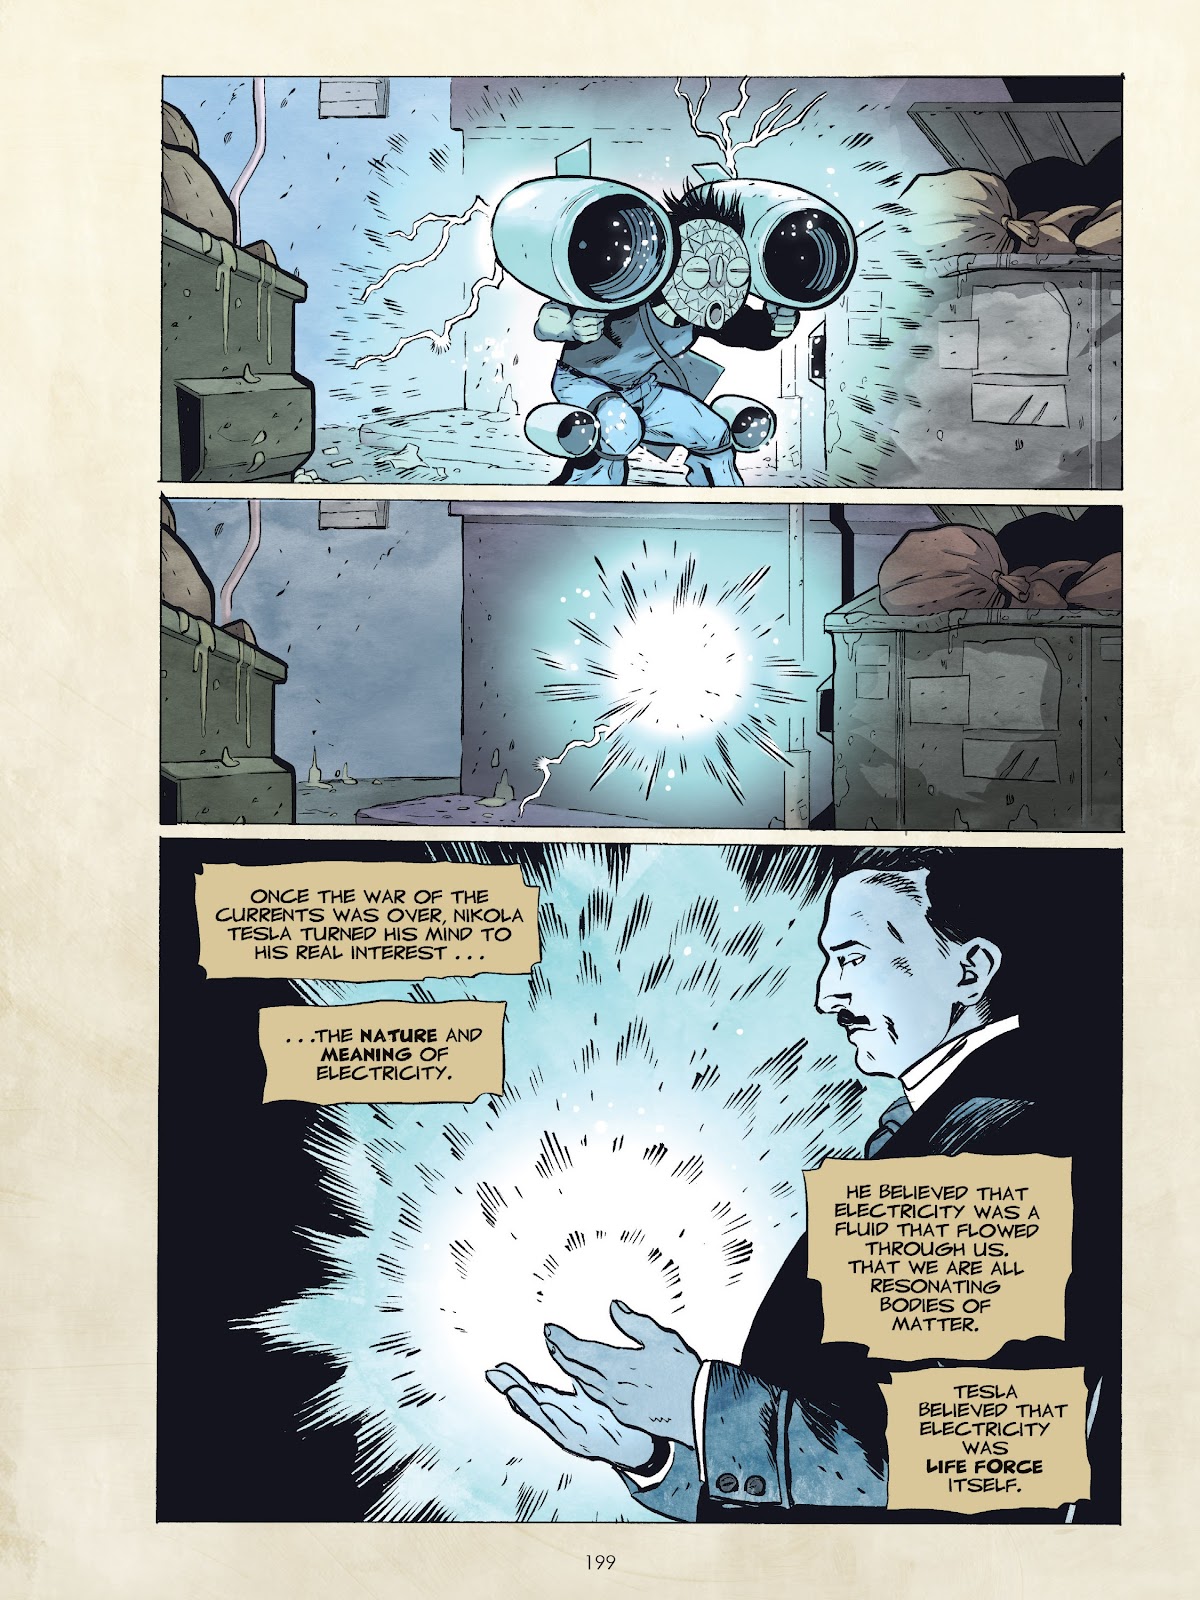 Read All Comics Online | Comic Books | Page 2123